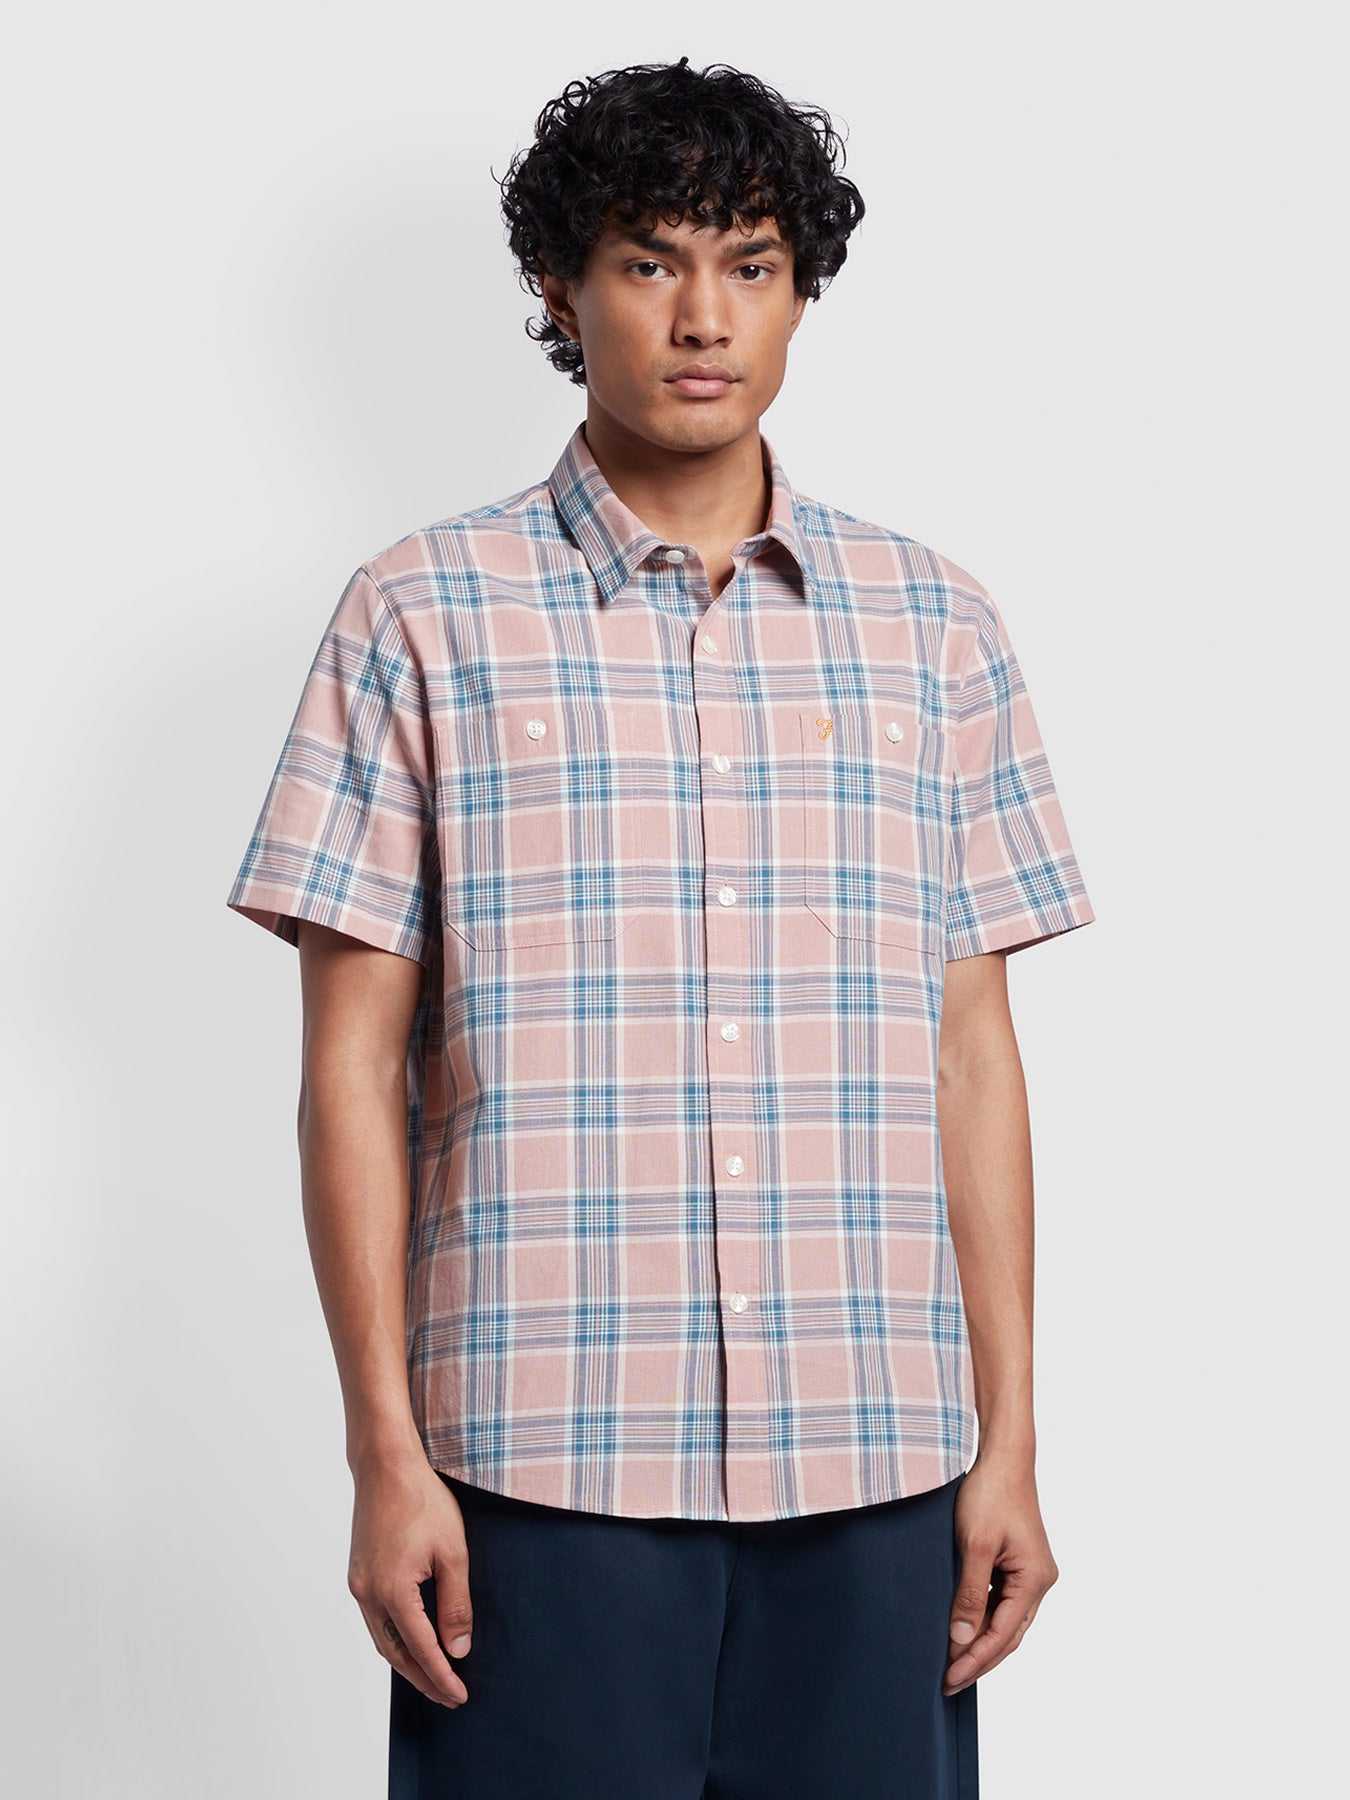 View Rocksteady Relaxed Fit Organic Cotton Check Shirt In Dark Pink information